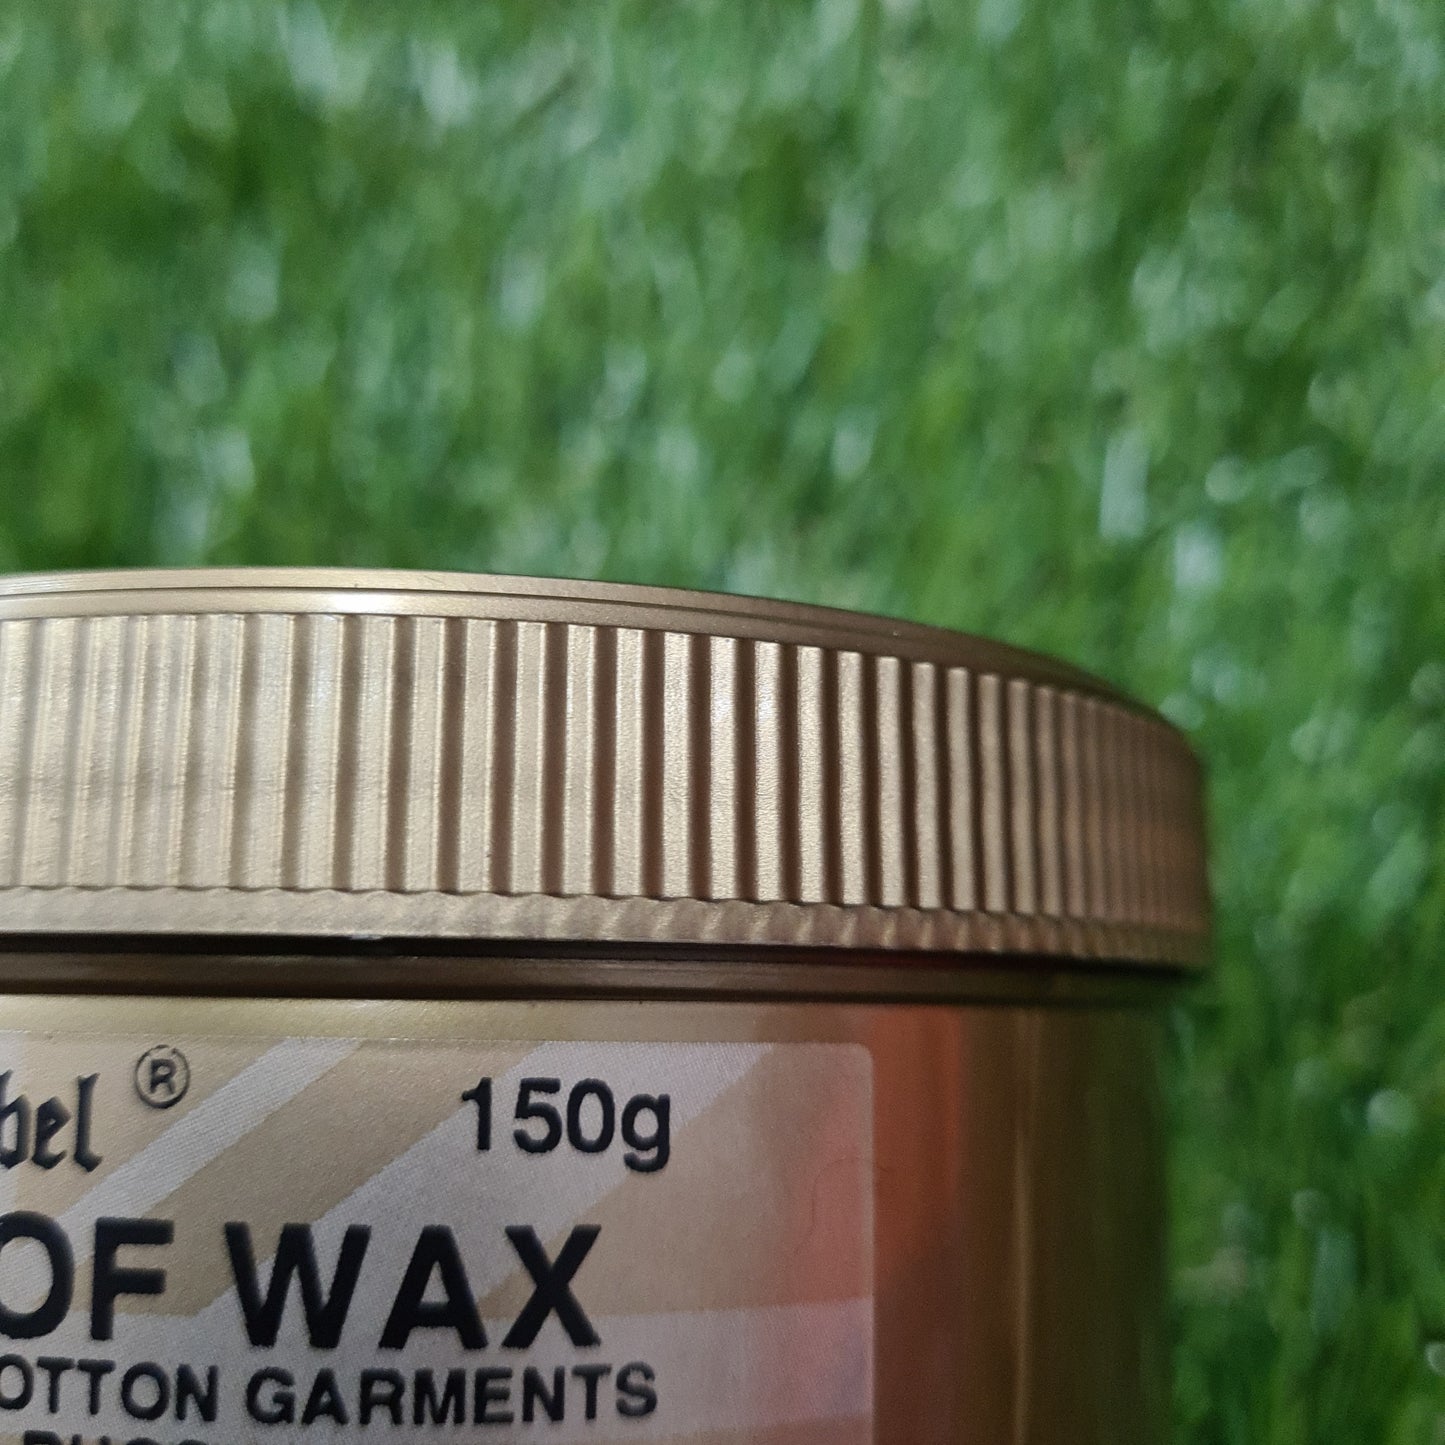 New gold label waterproof wax 150g FREE POSTAGE 🟢